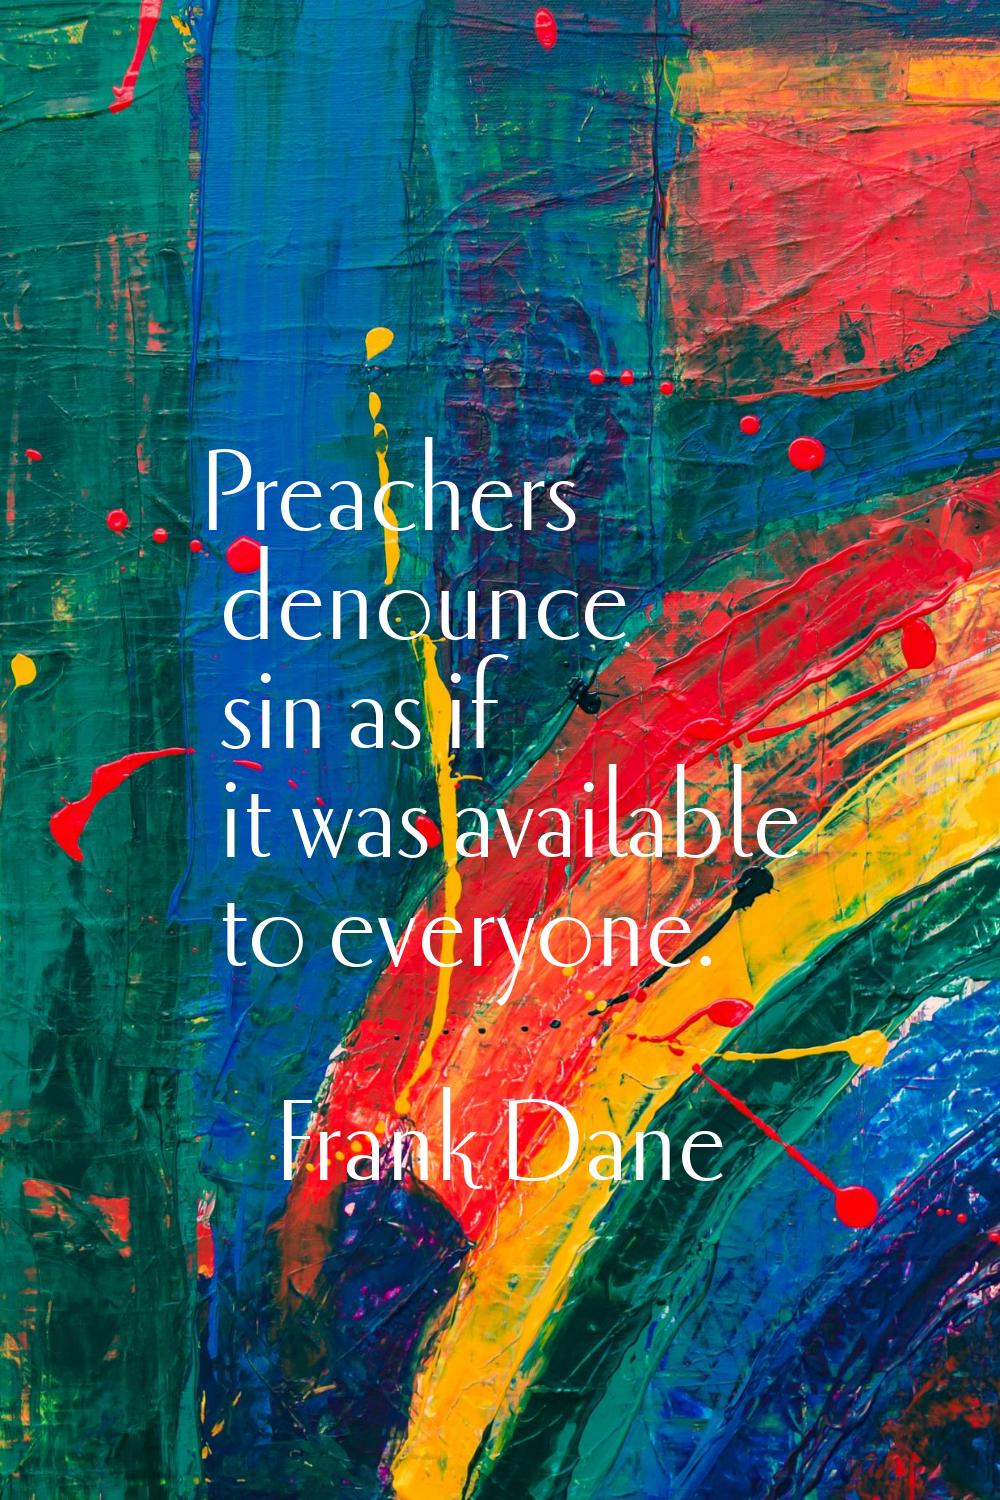 Preachers denounce sin as if it was available to everyone.